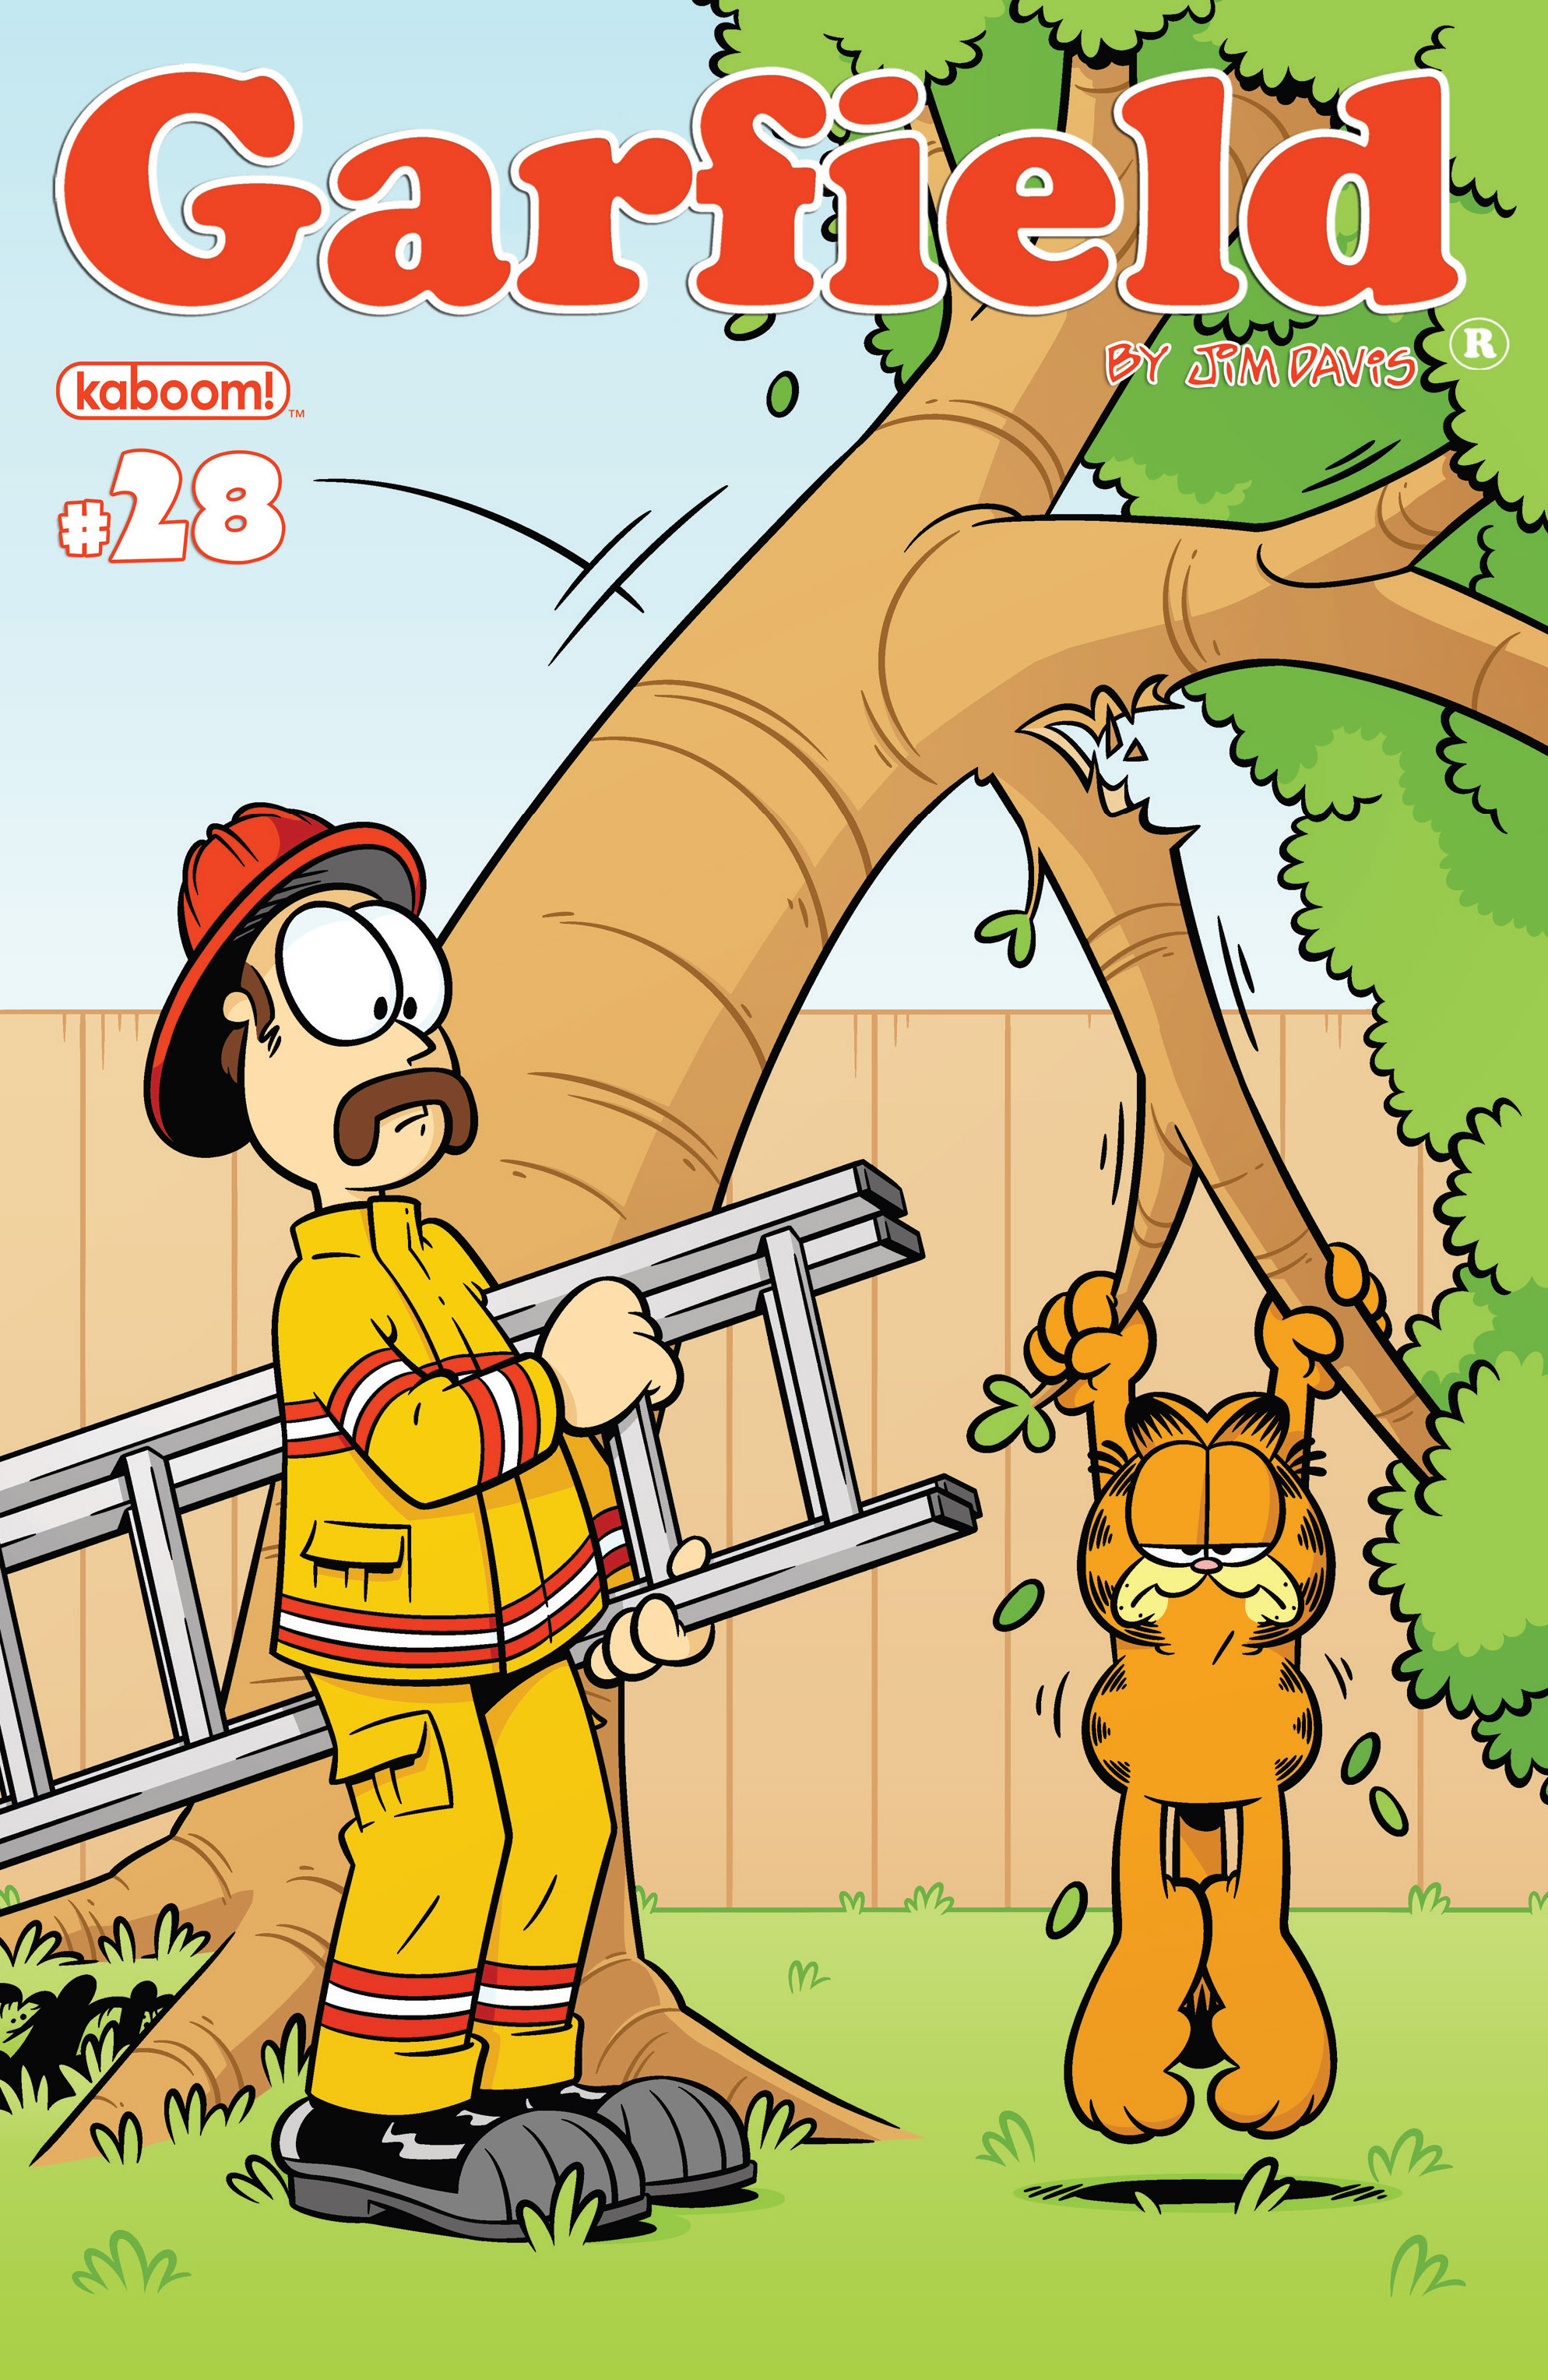 Garfield Issue 28 | Read Garfield Issue 28 comic online in high quality.  Read Full Comic online for free - Read comics online in high quality .